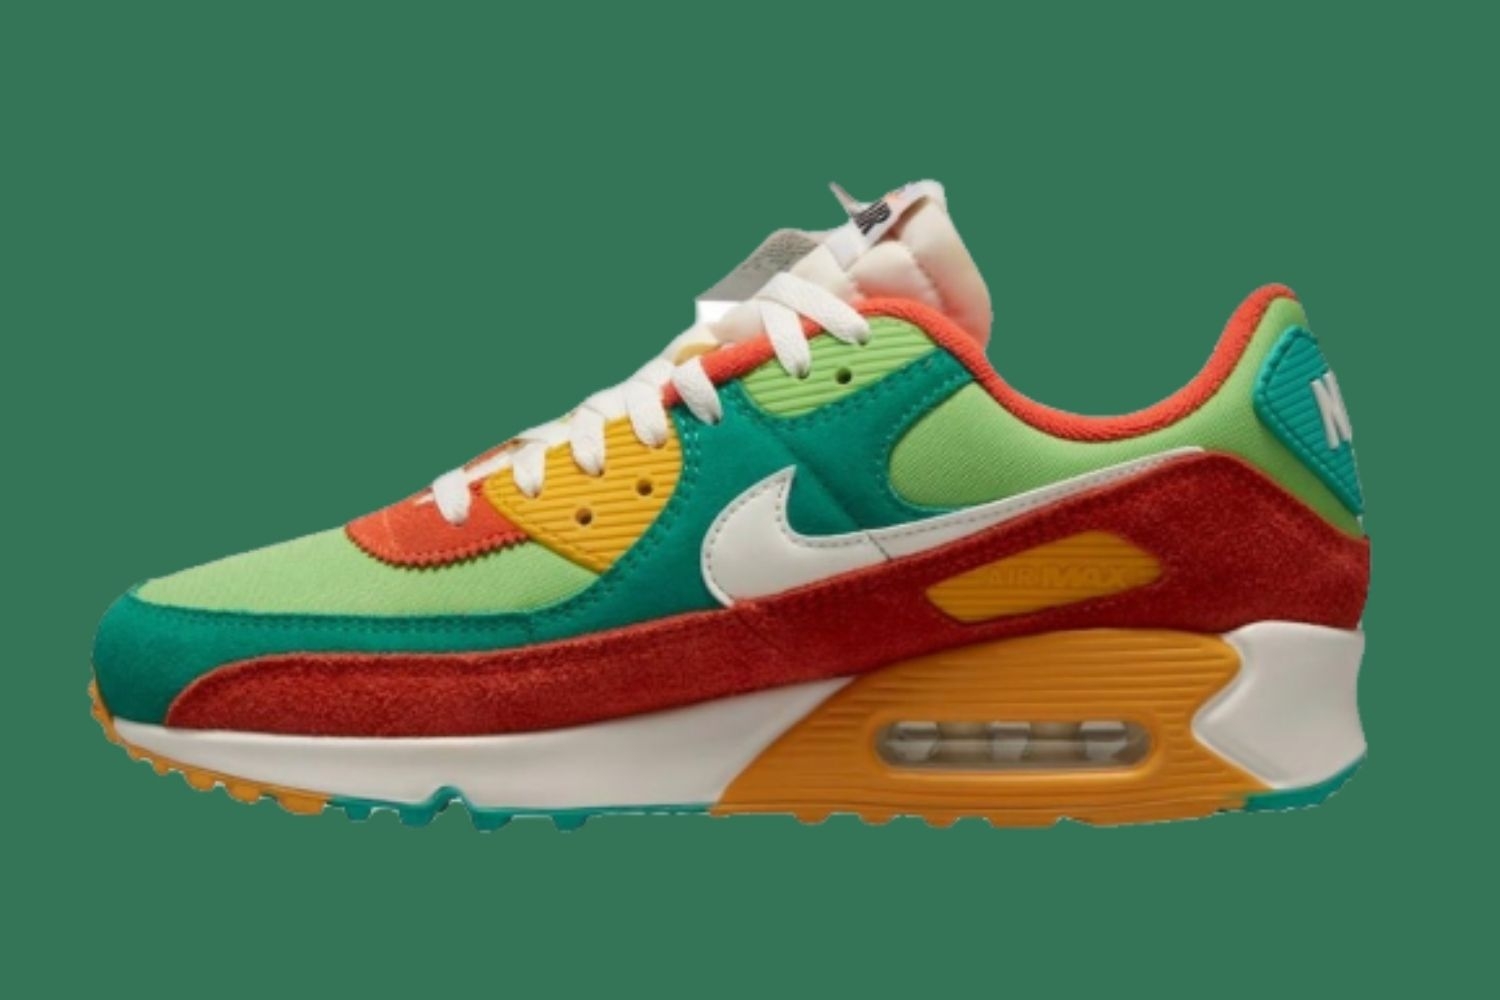 Check out the Air Max 90 SE 'Running Club' here